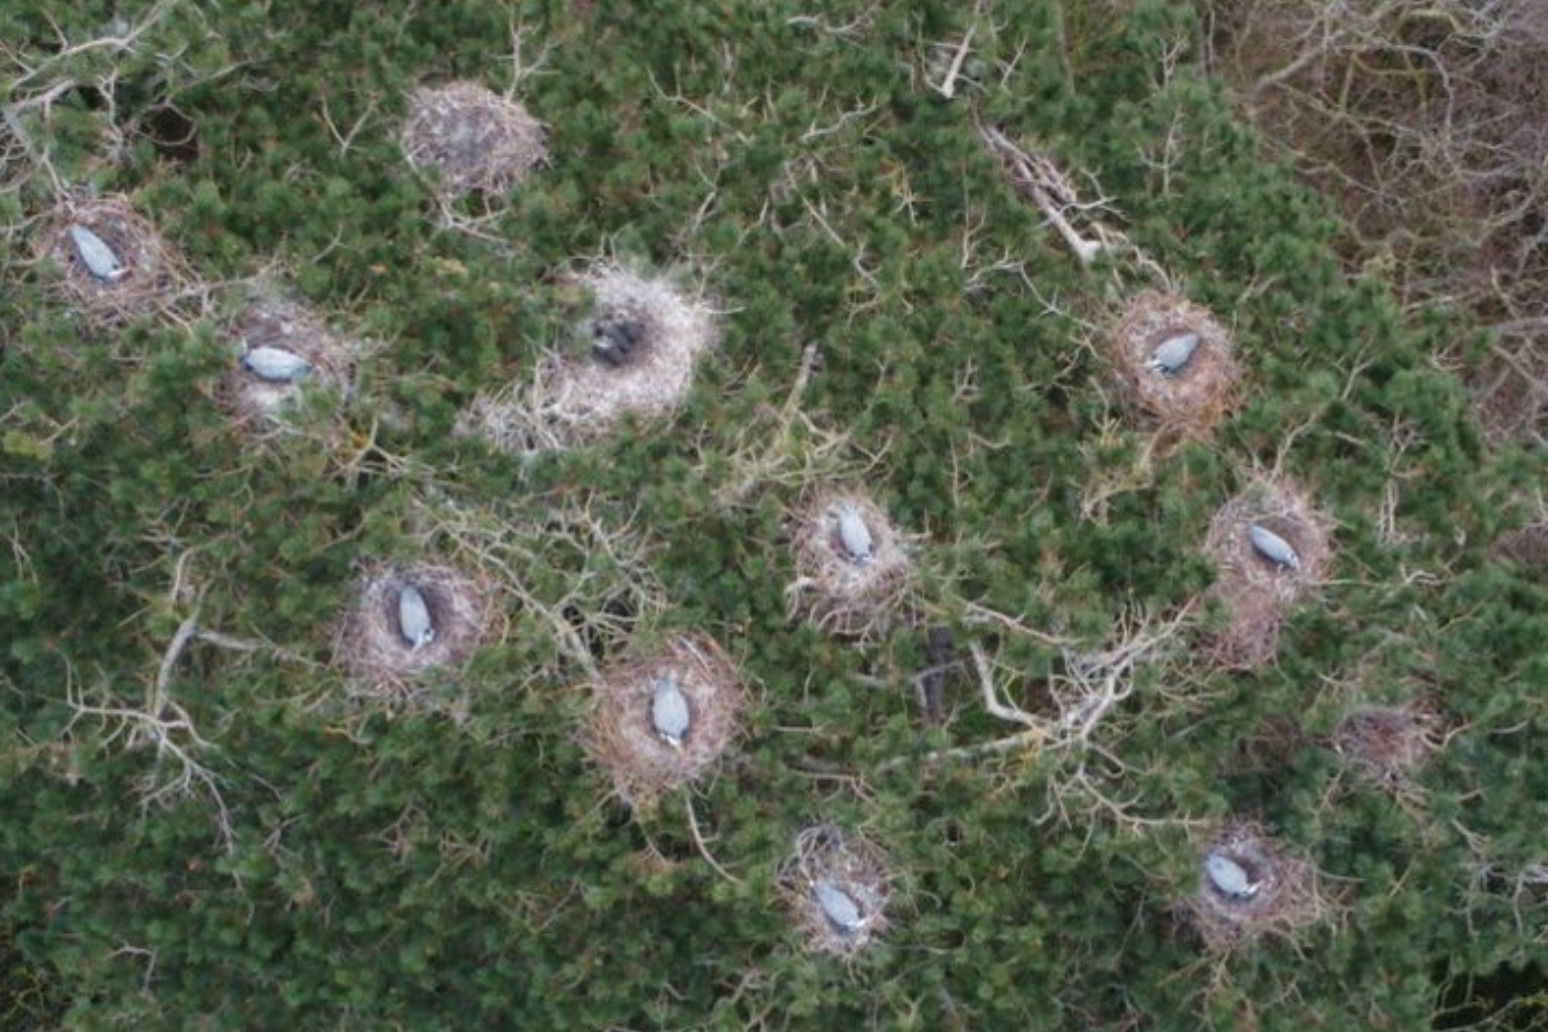 Drone gives bird’s eye view of heronry and reveals more nests than expected 